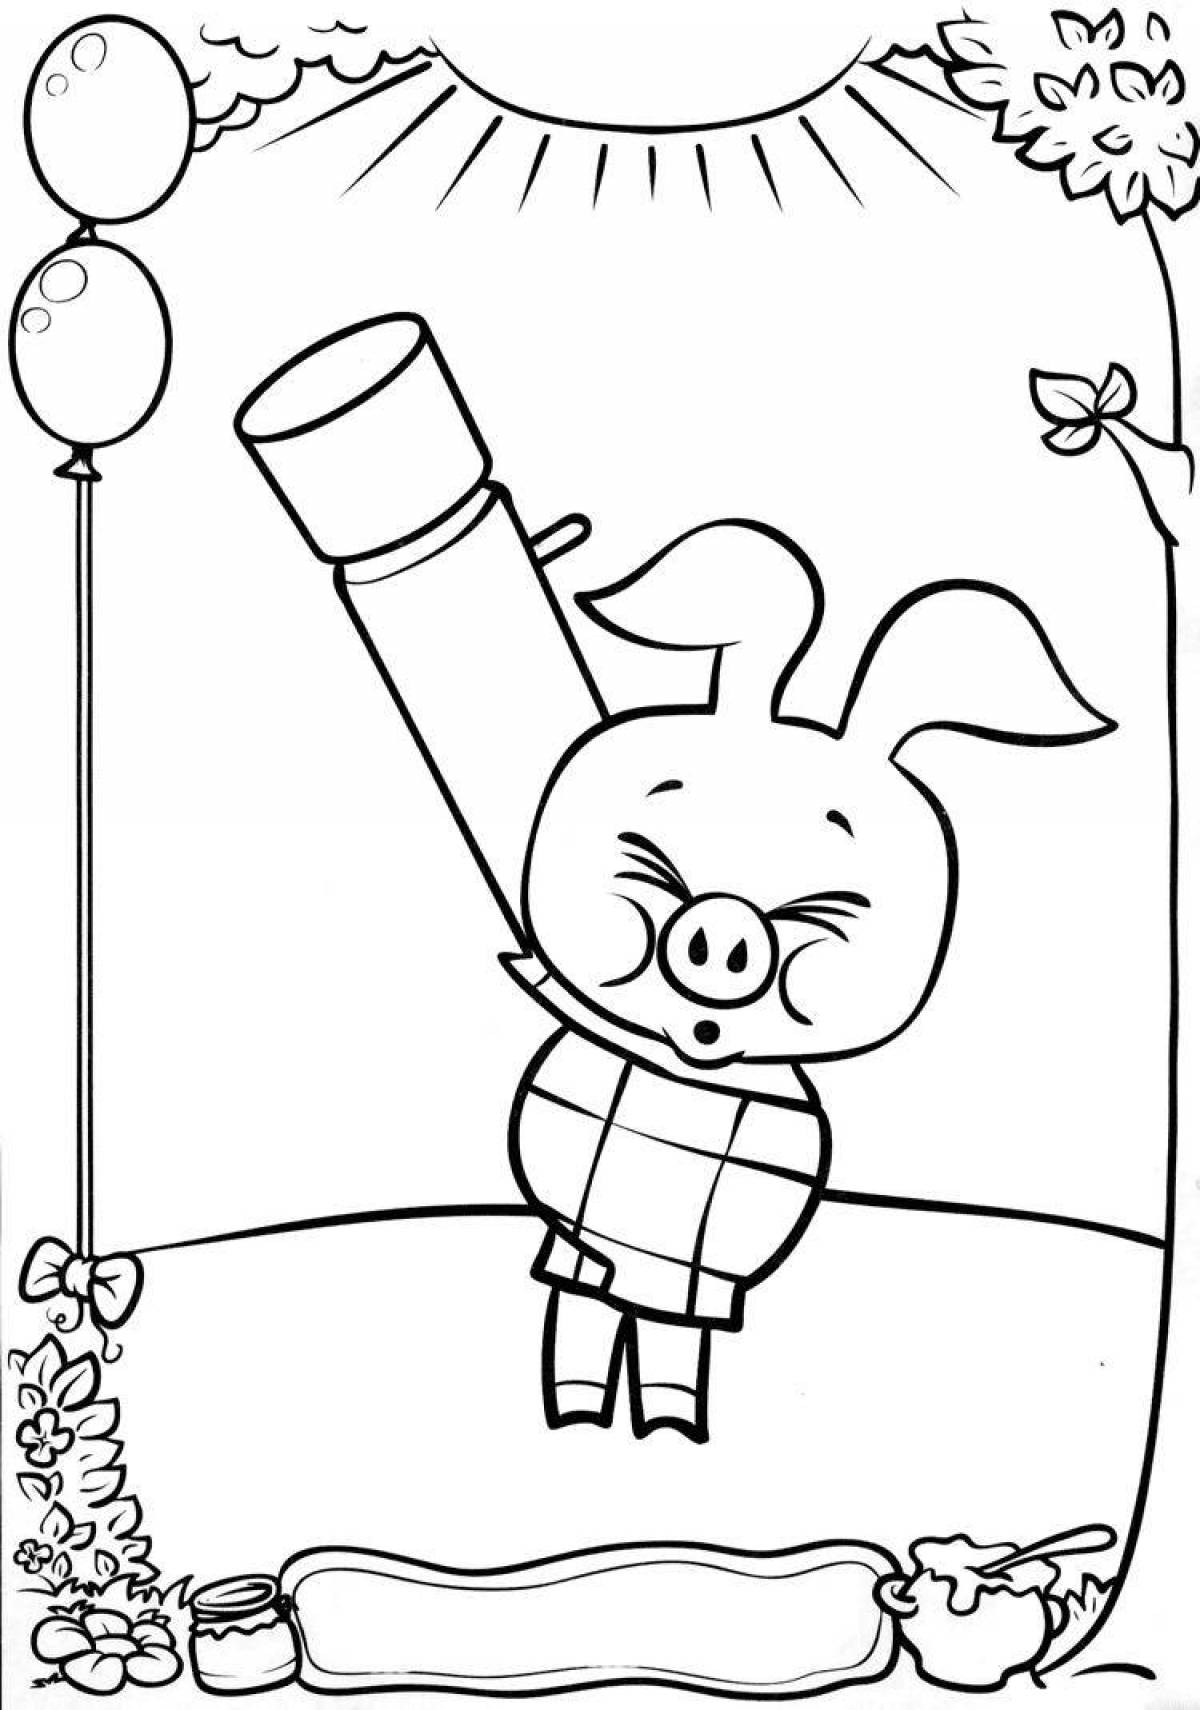 Adorable pig coloring page